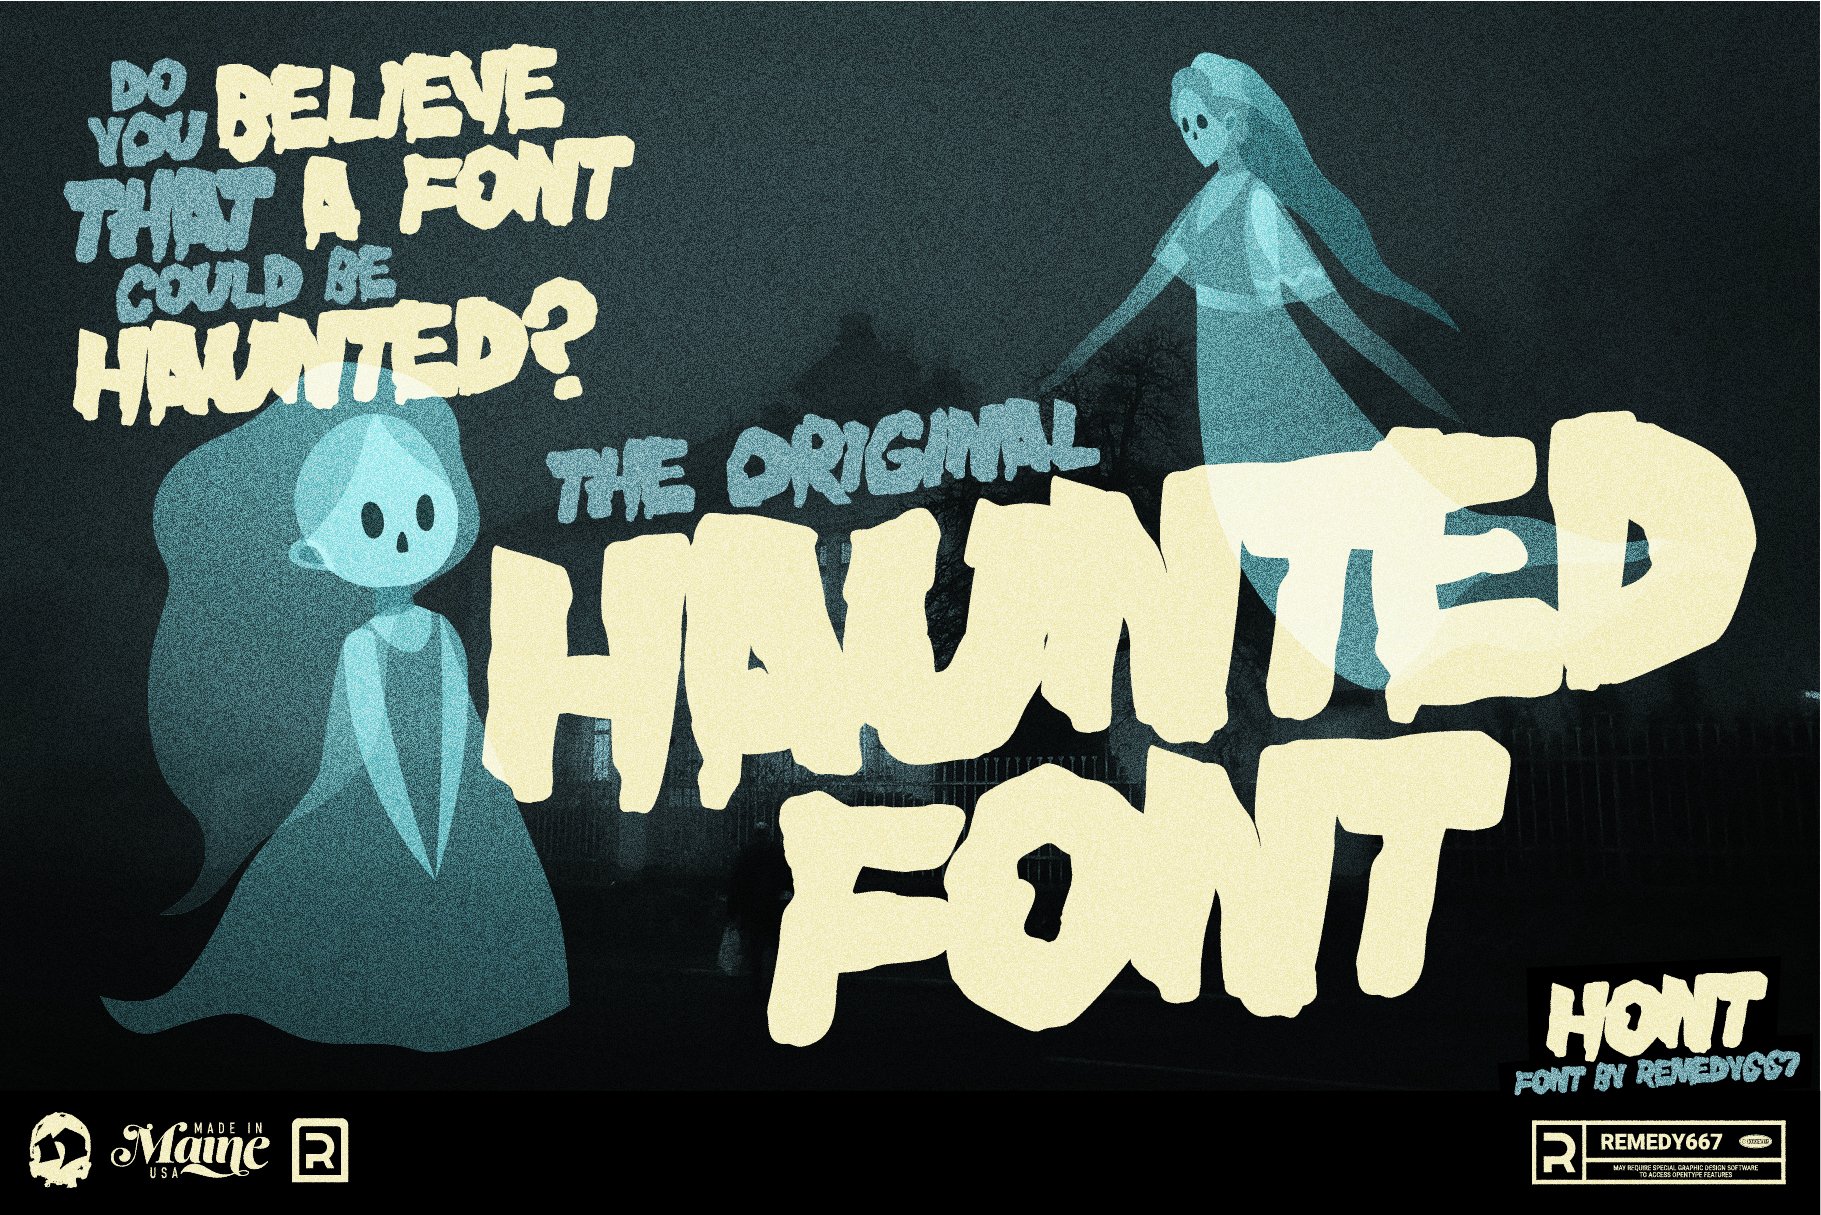 Hont - The Original Haunted Font preview image.